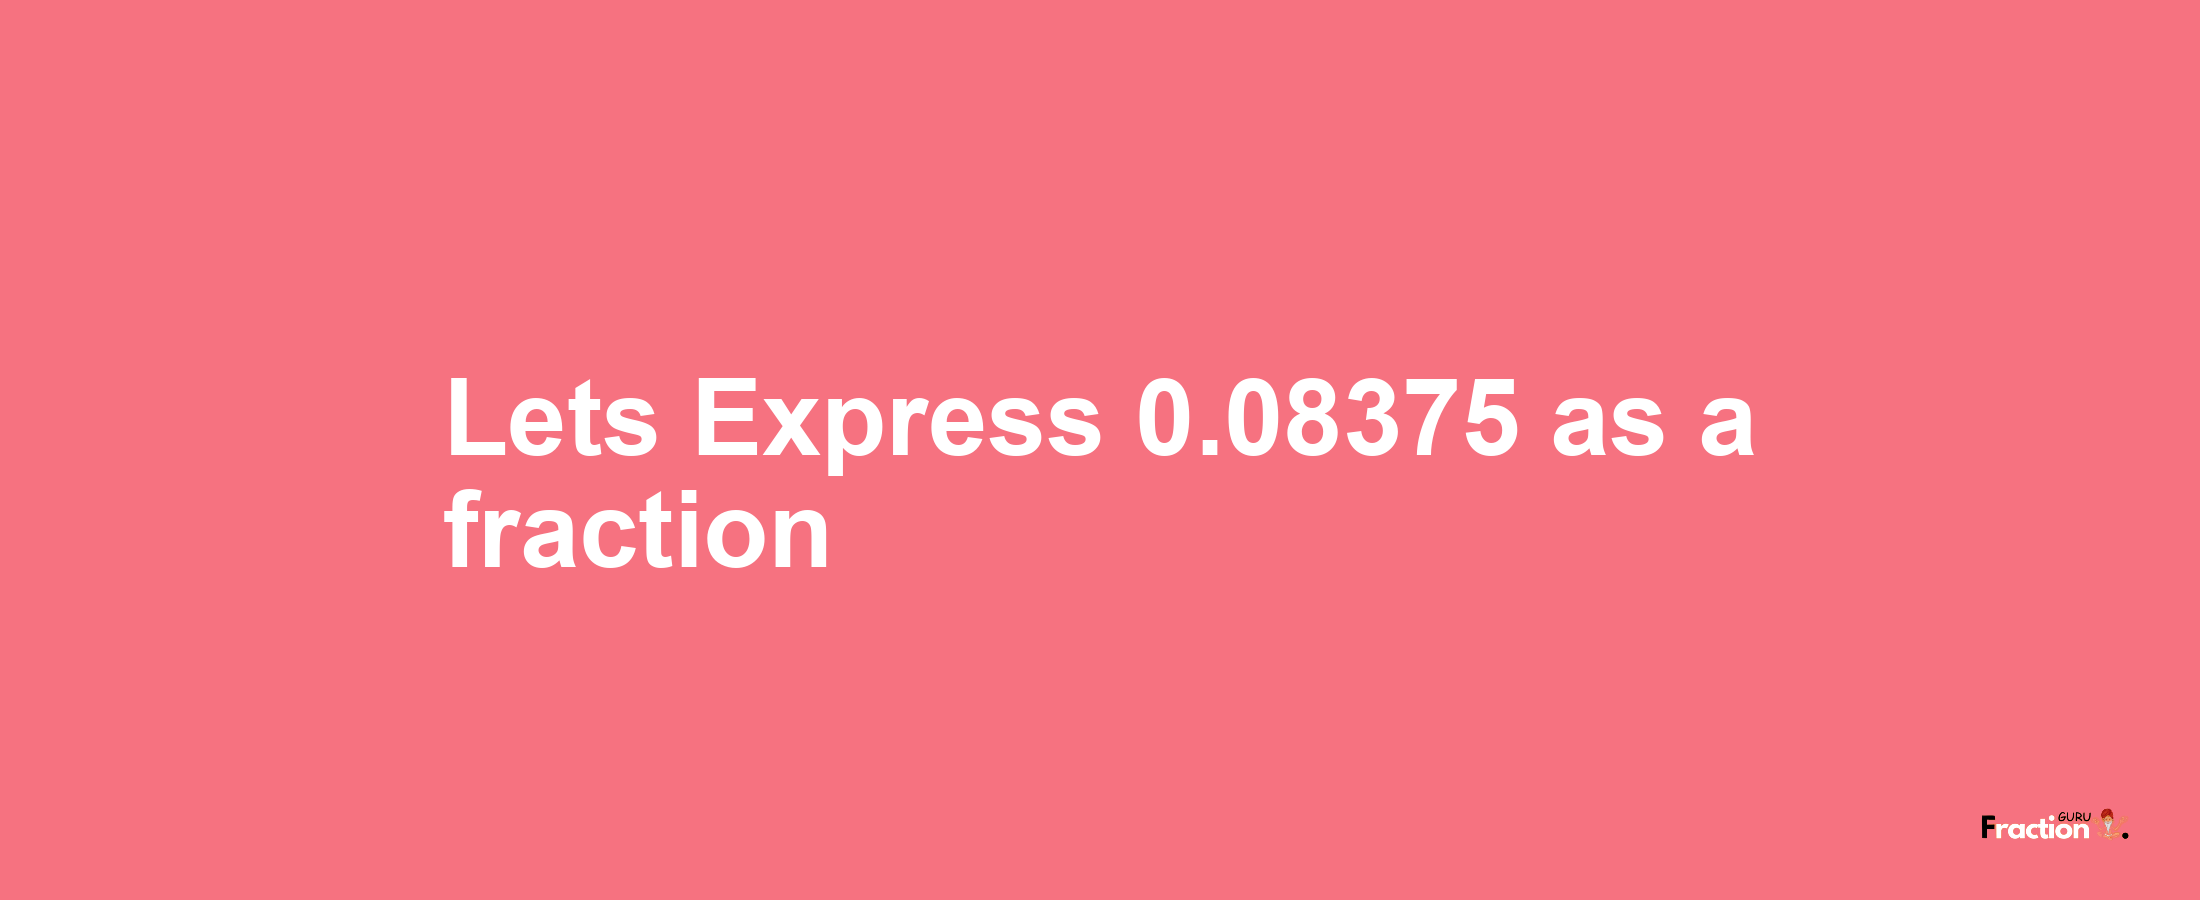 Lets Express 0.08375 as afraction